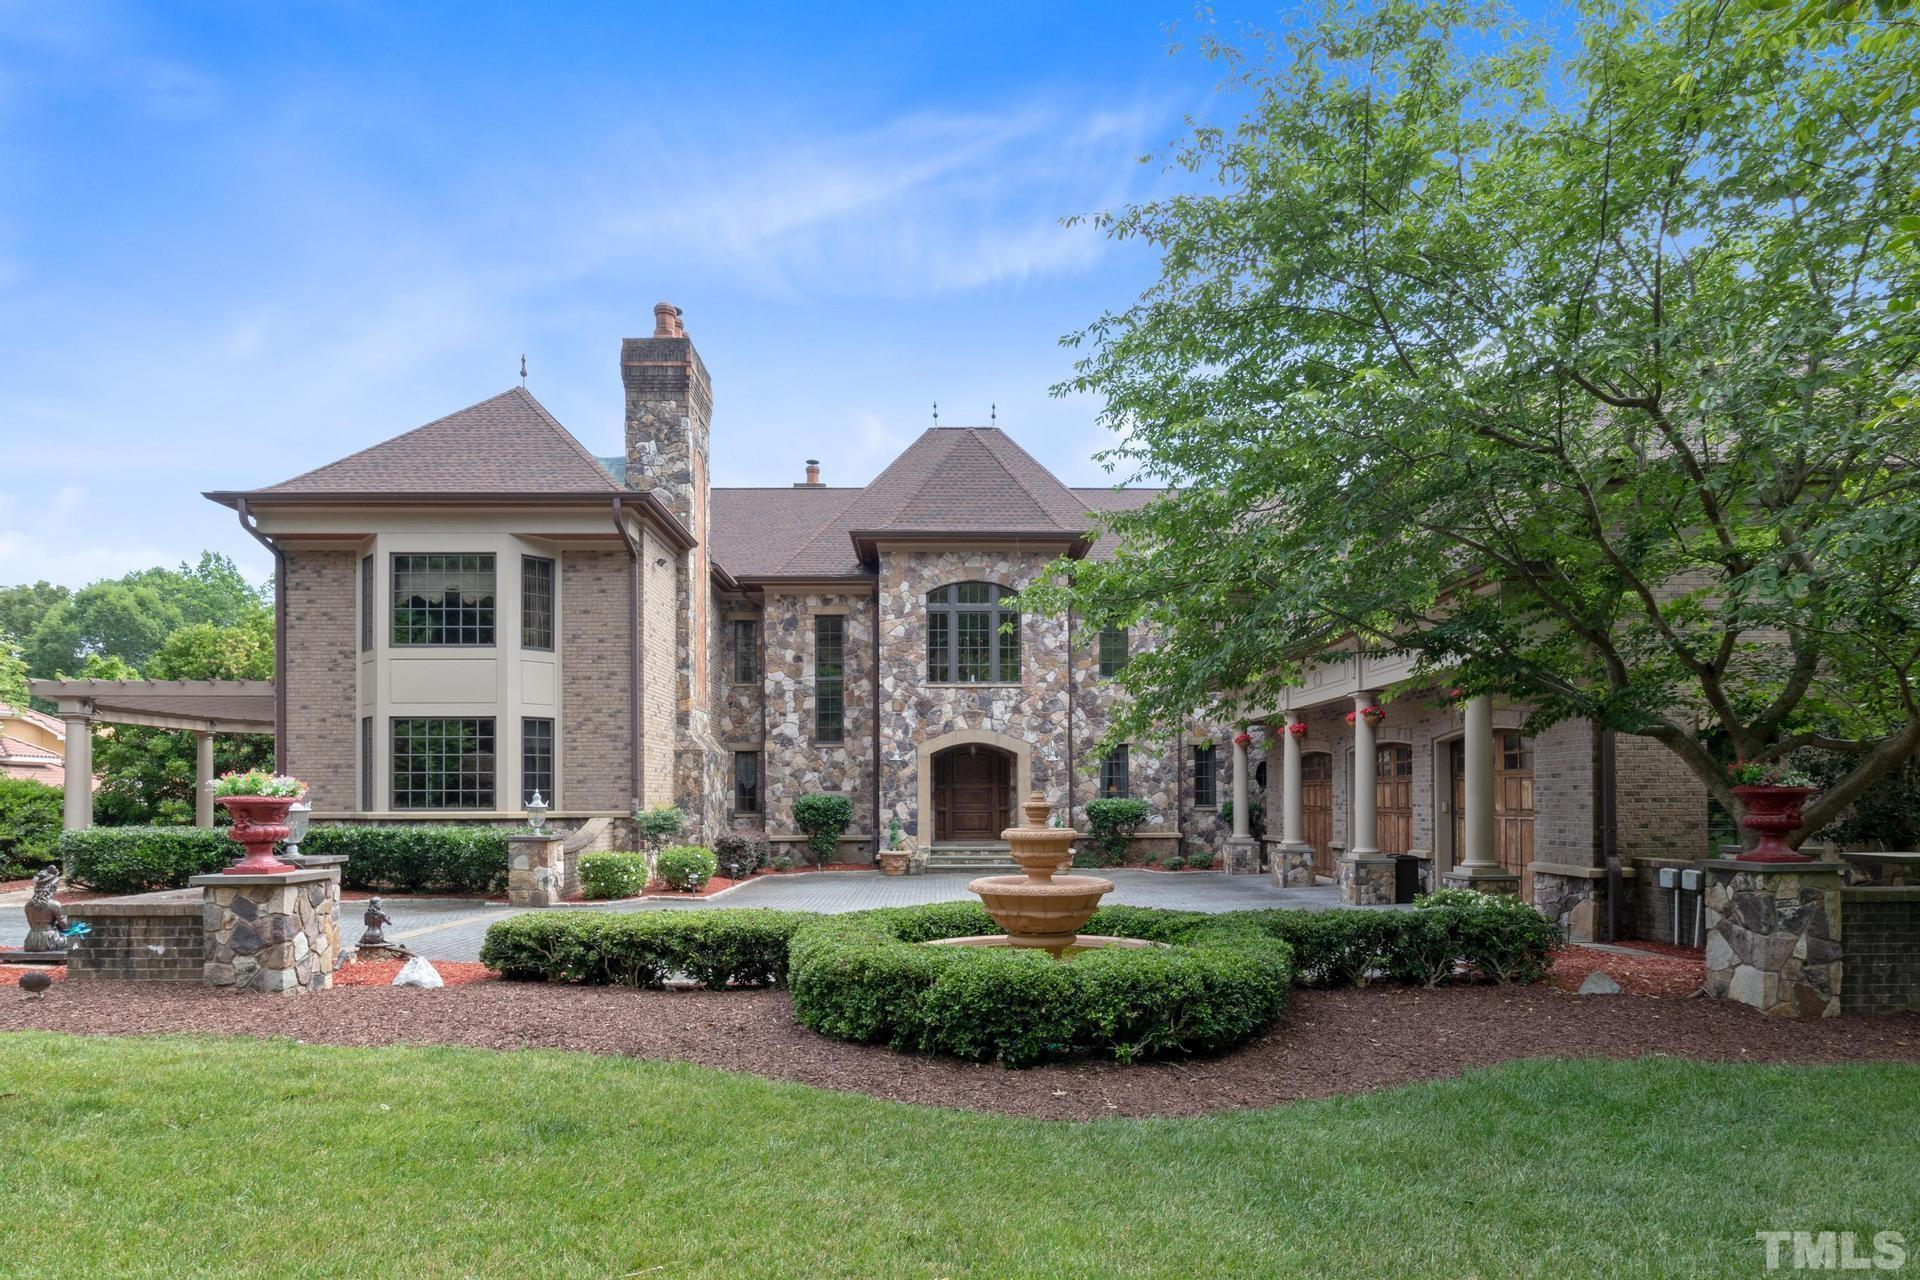 All brick or stone exterior, arched windows, hipped roof are classic French Provincial details. Lush landscaped front yard with a beautiful fountain.